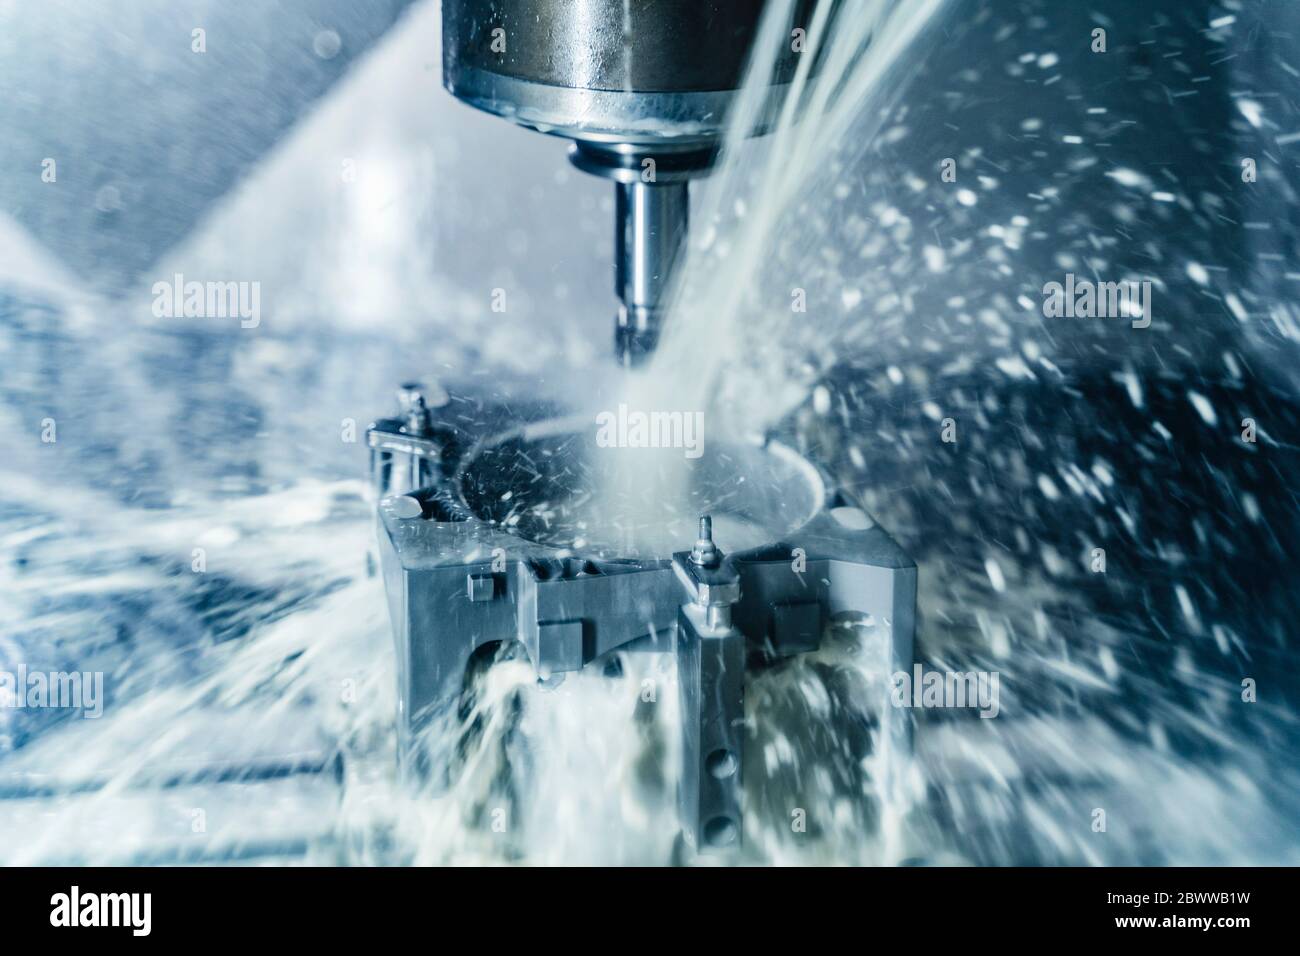 Germany, Close-up of water cooling down milling cutter Stock Photo